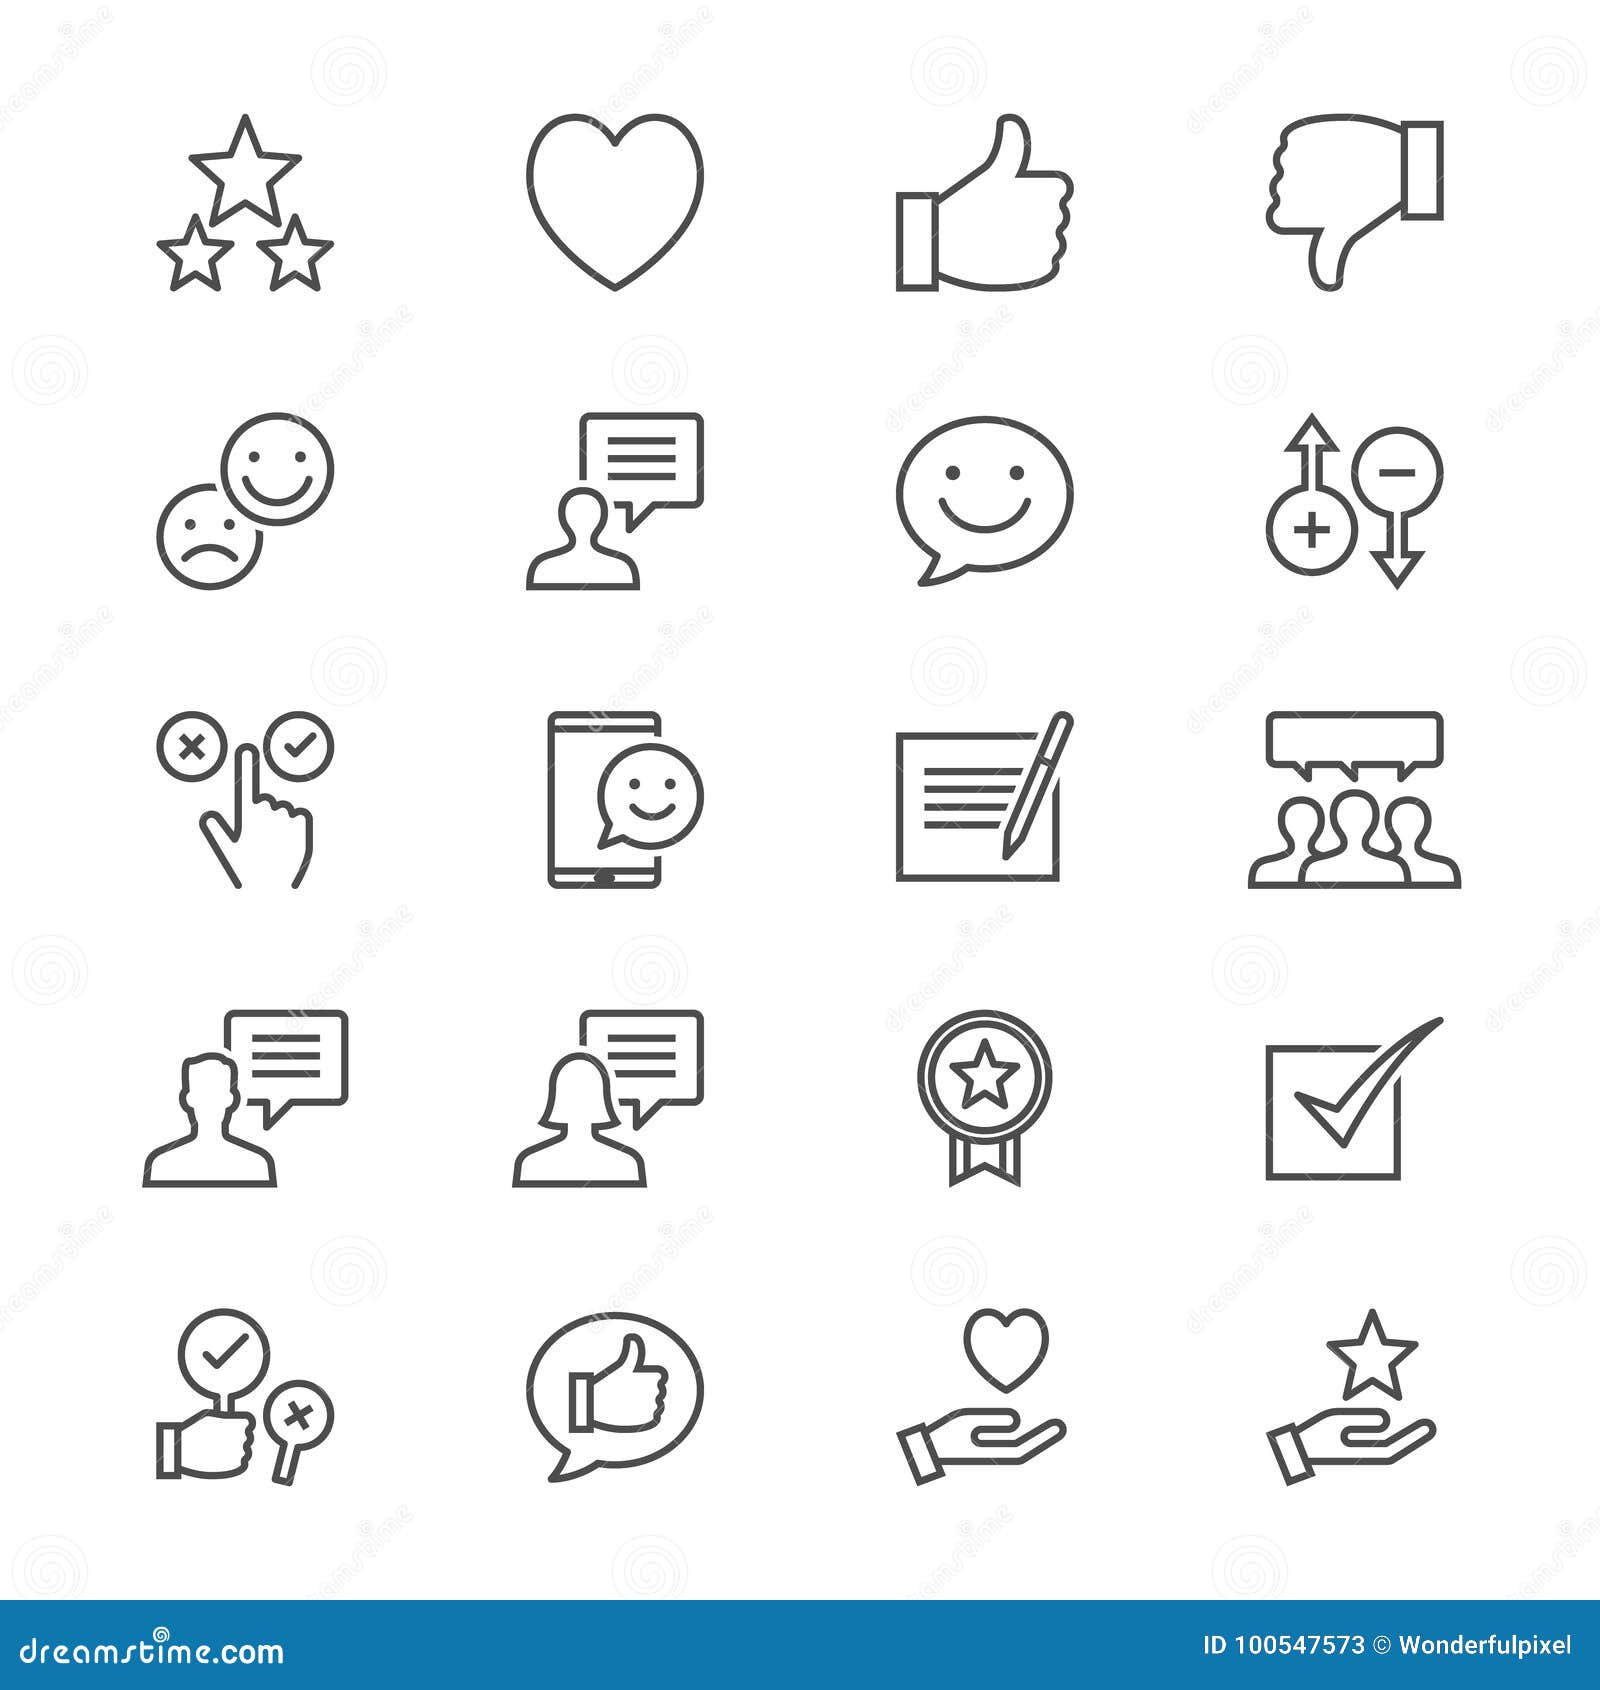 feedback and review thin icons